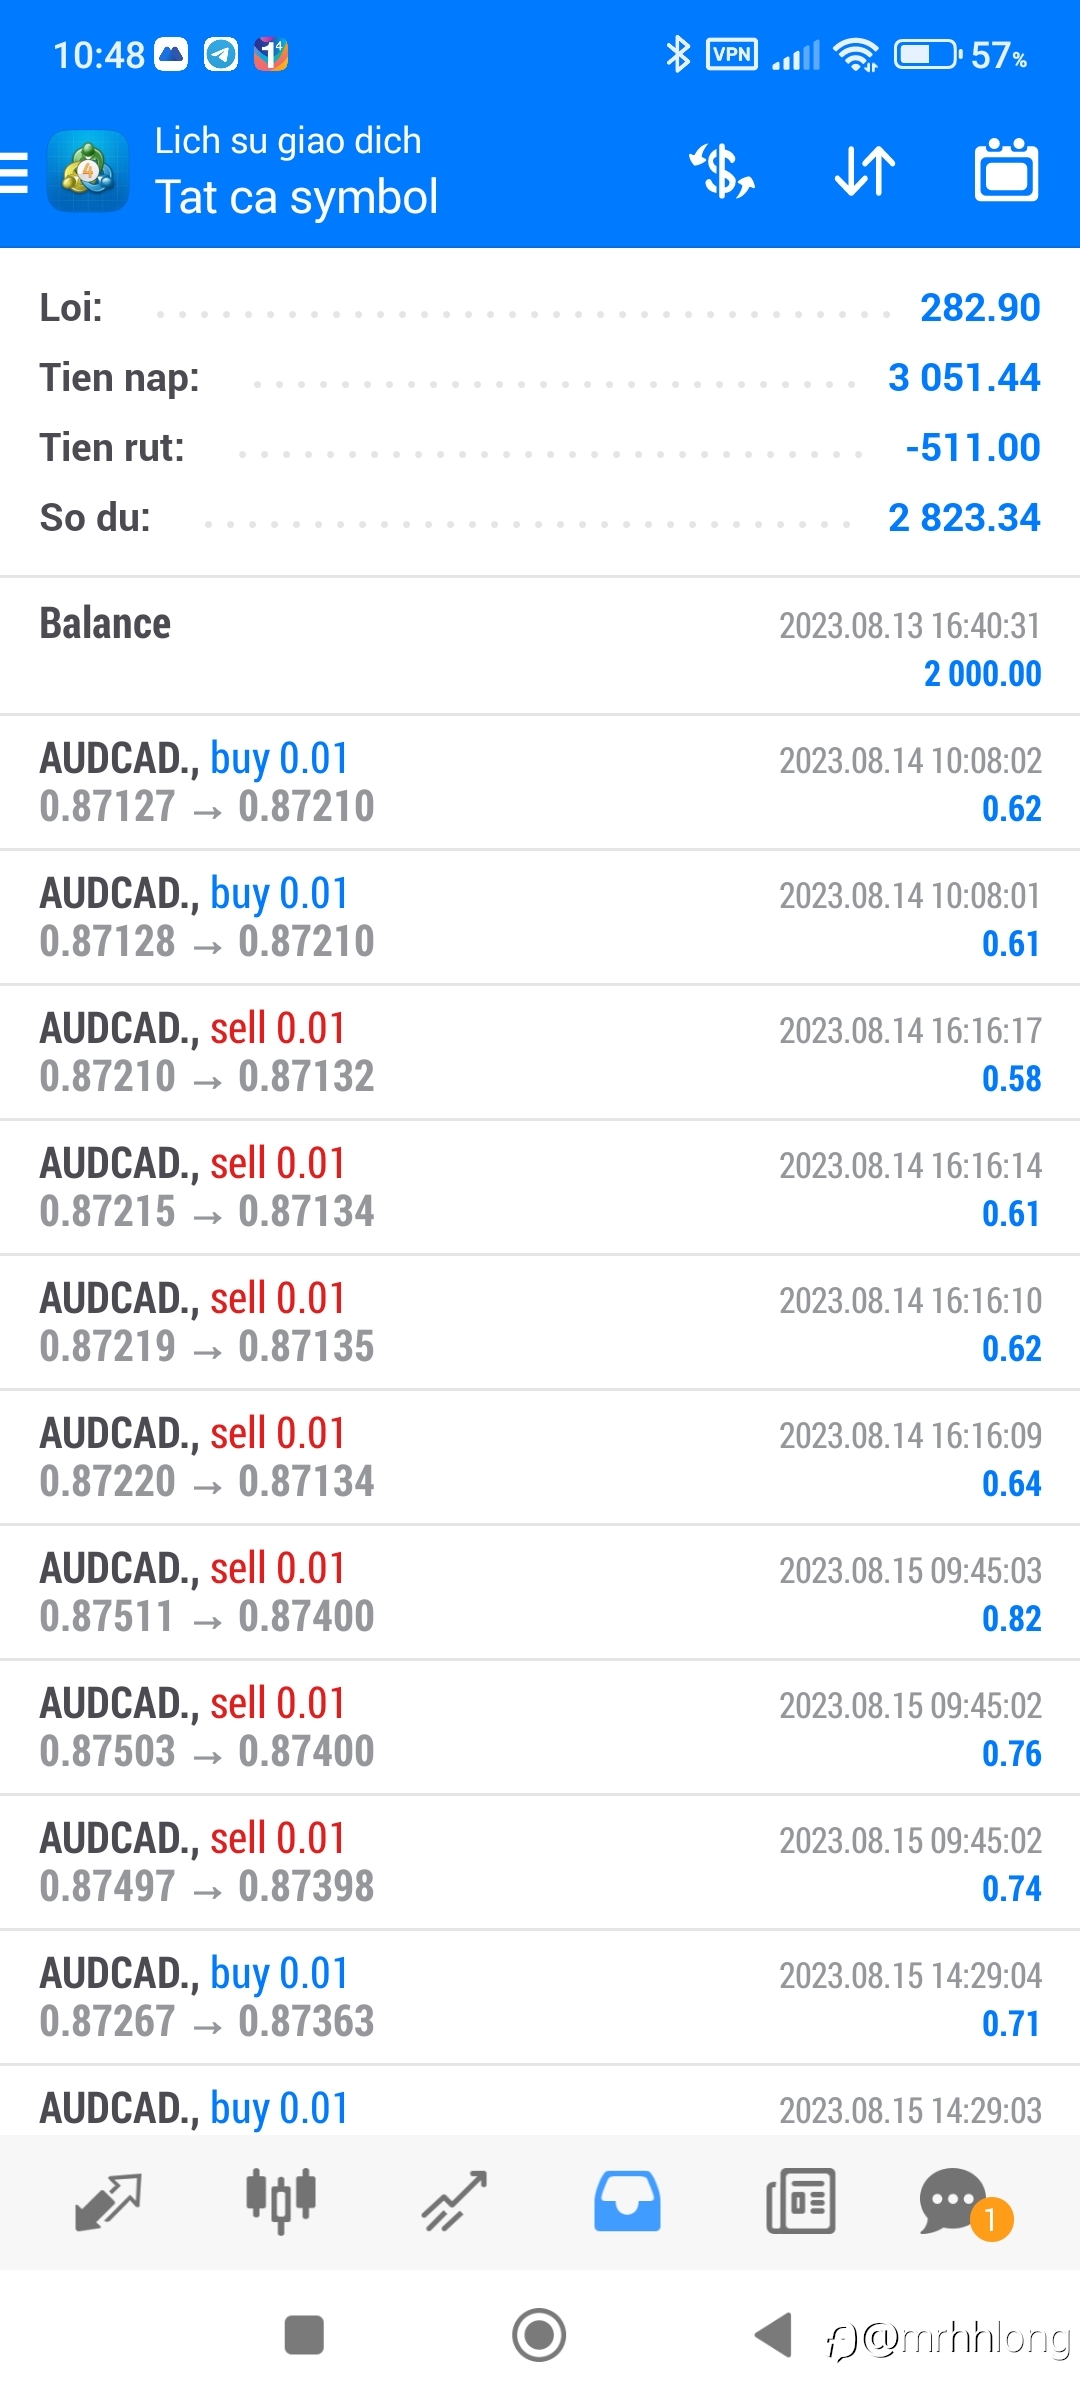 my account after one month of trading